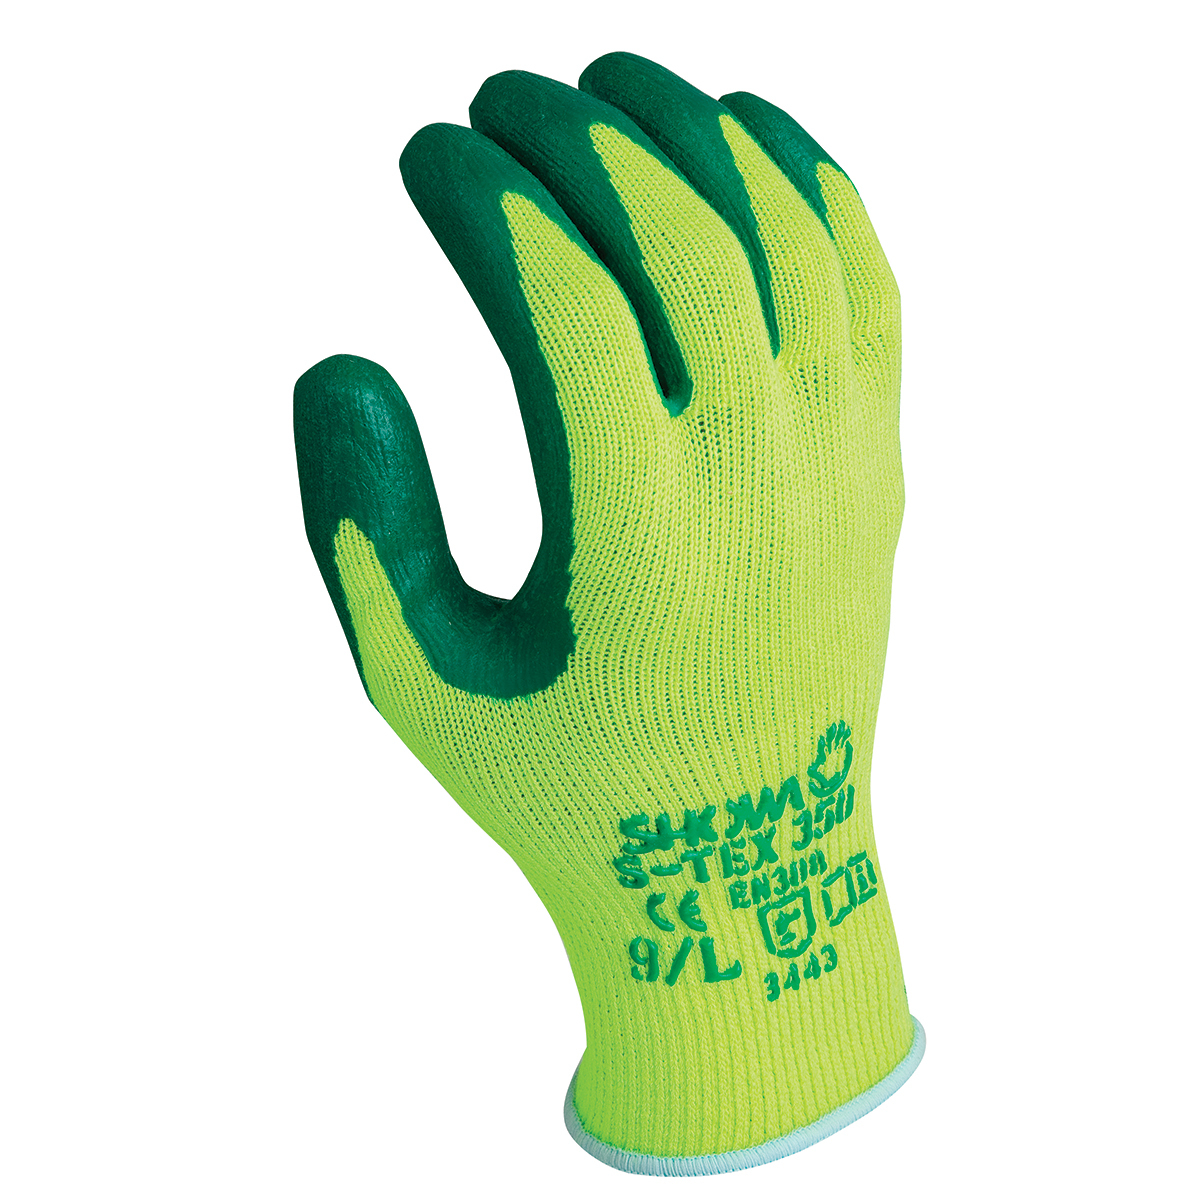 SHOWA® Size 10 S-TEX® 350 10 Gauge Hagane Coil® And Polyester And Stainless Steel Cut Resistant Gloves With Nitrile Coating